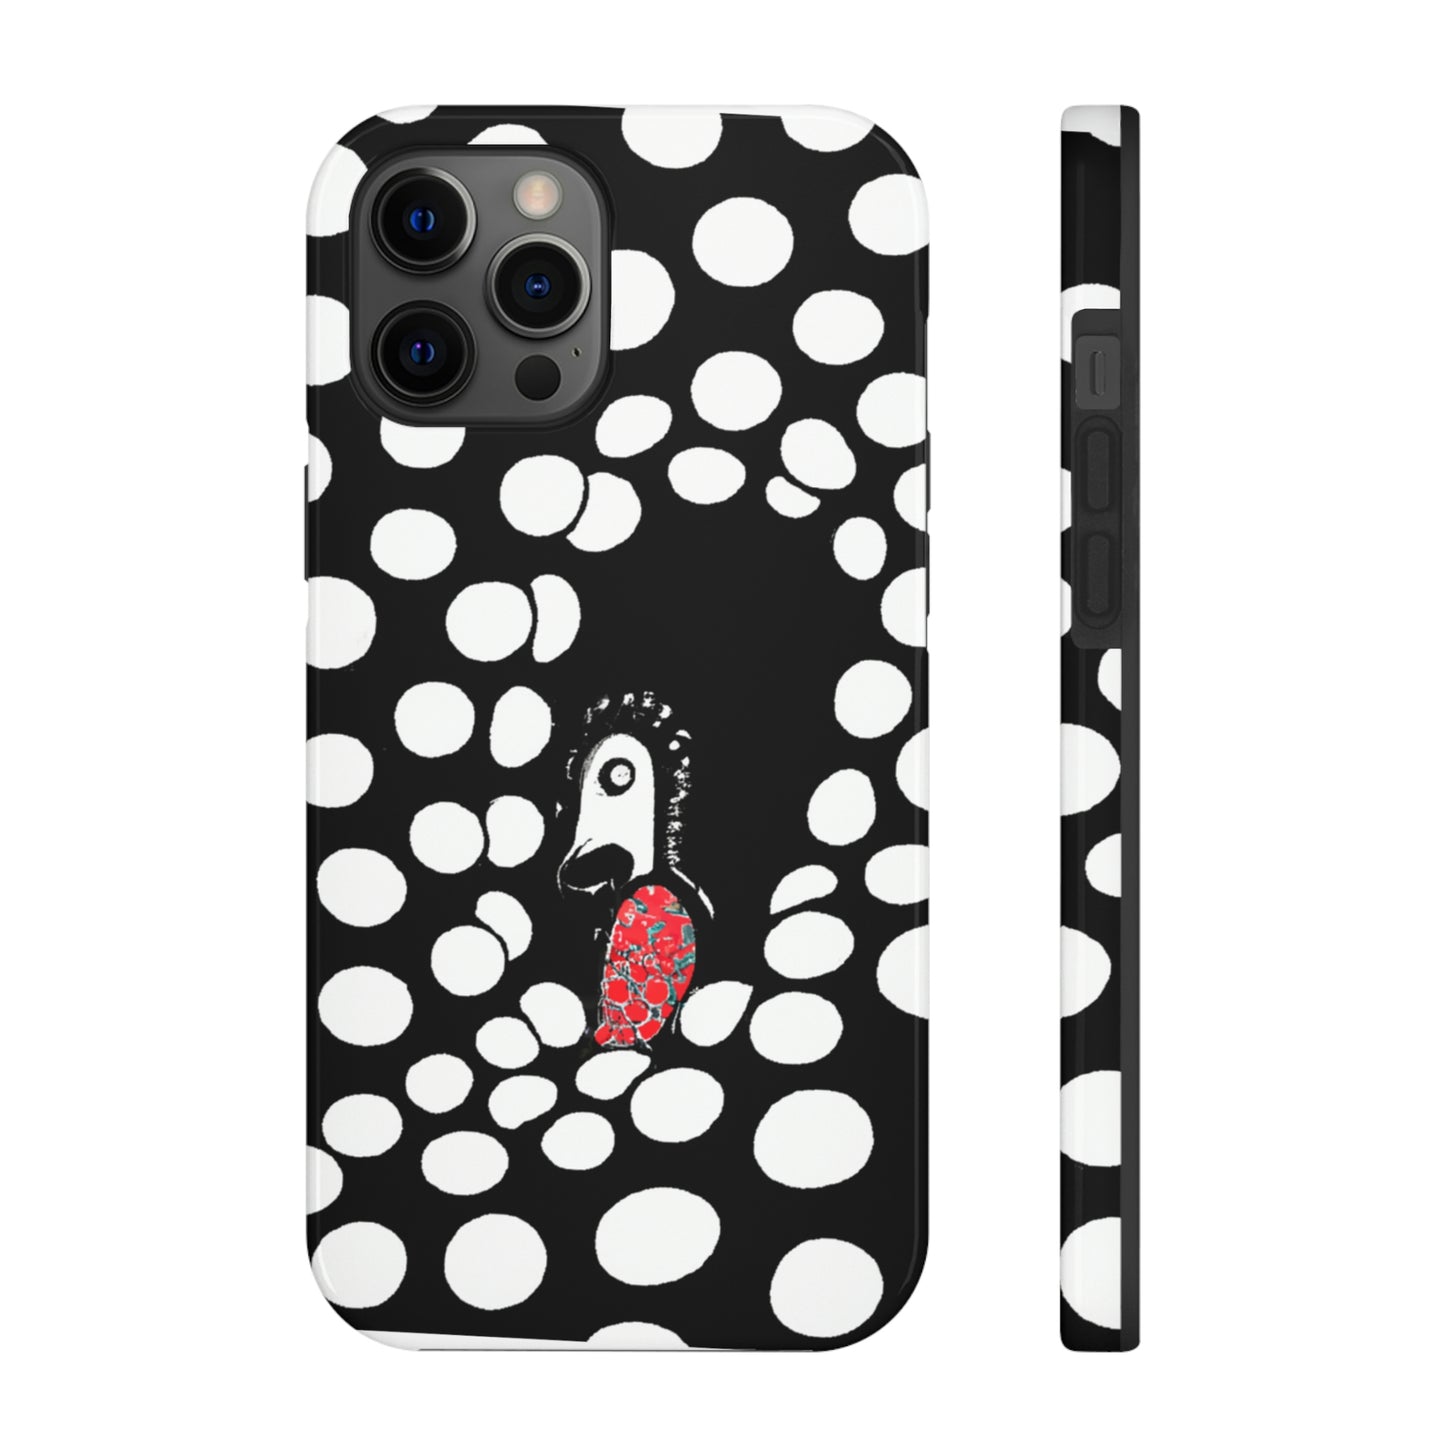 The Great Cavern Illumination - The Alien Tough Phone Cases